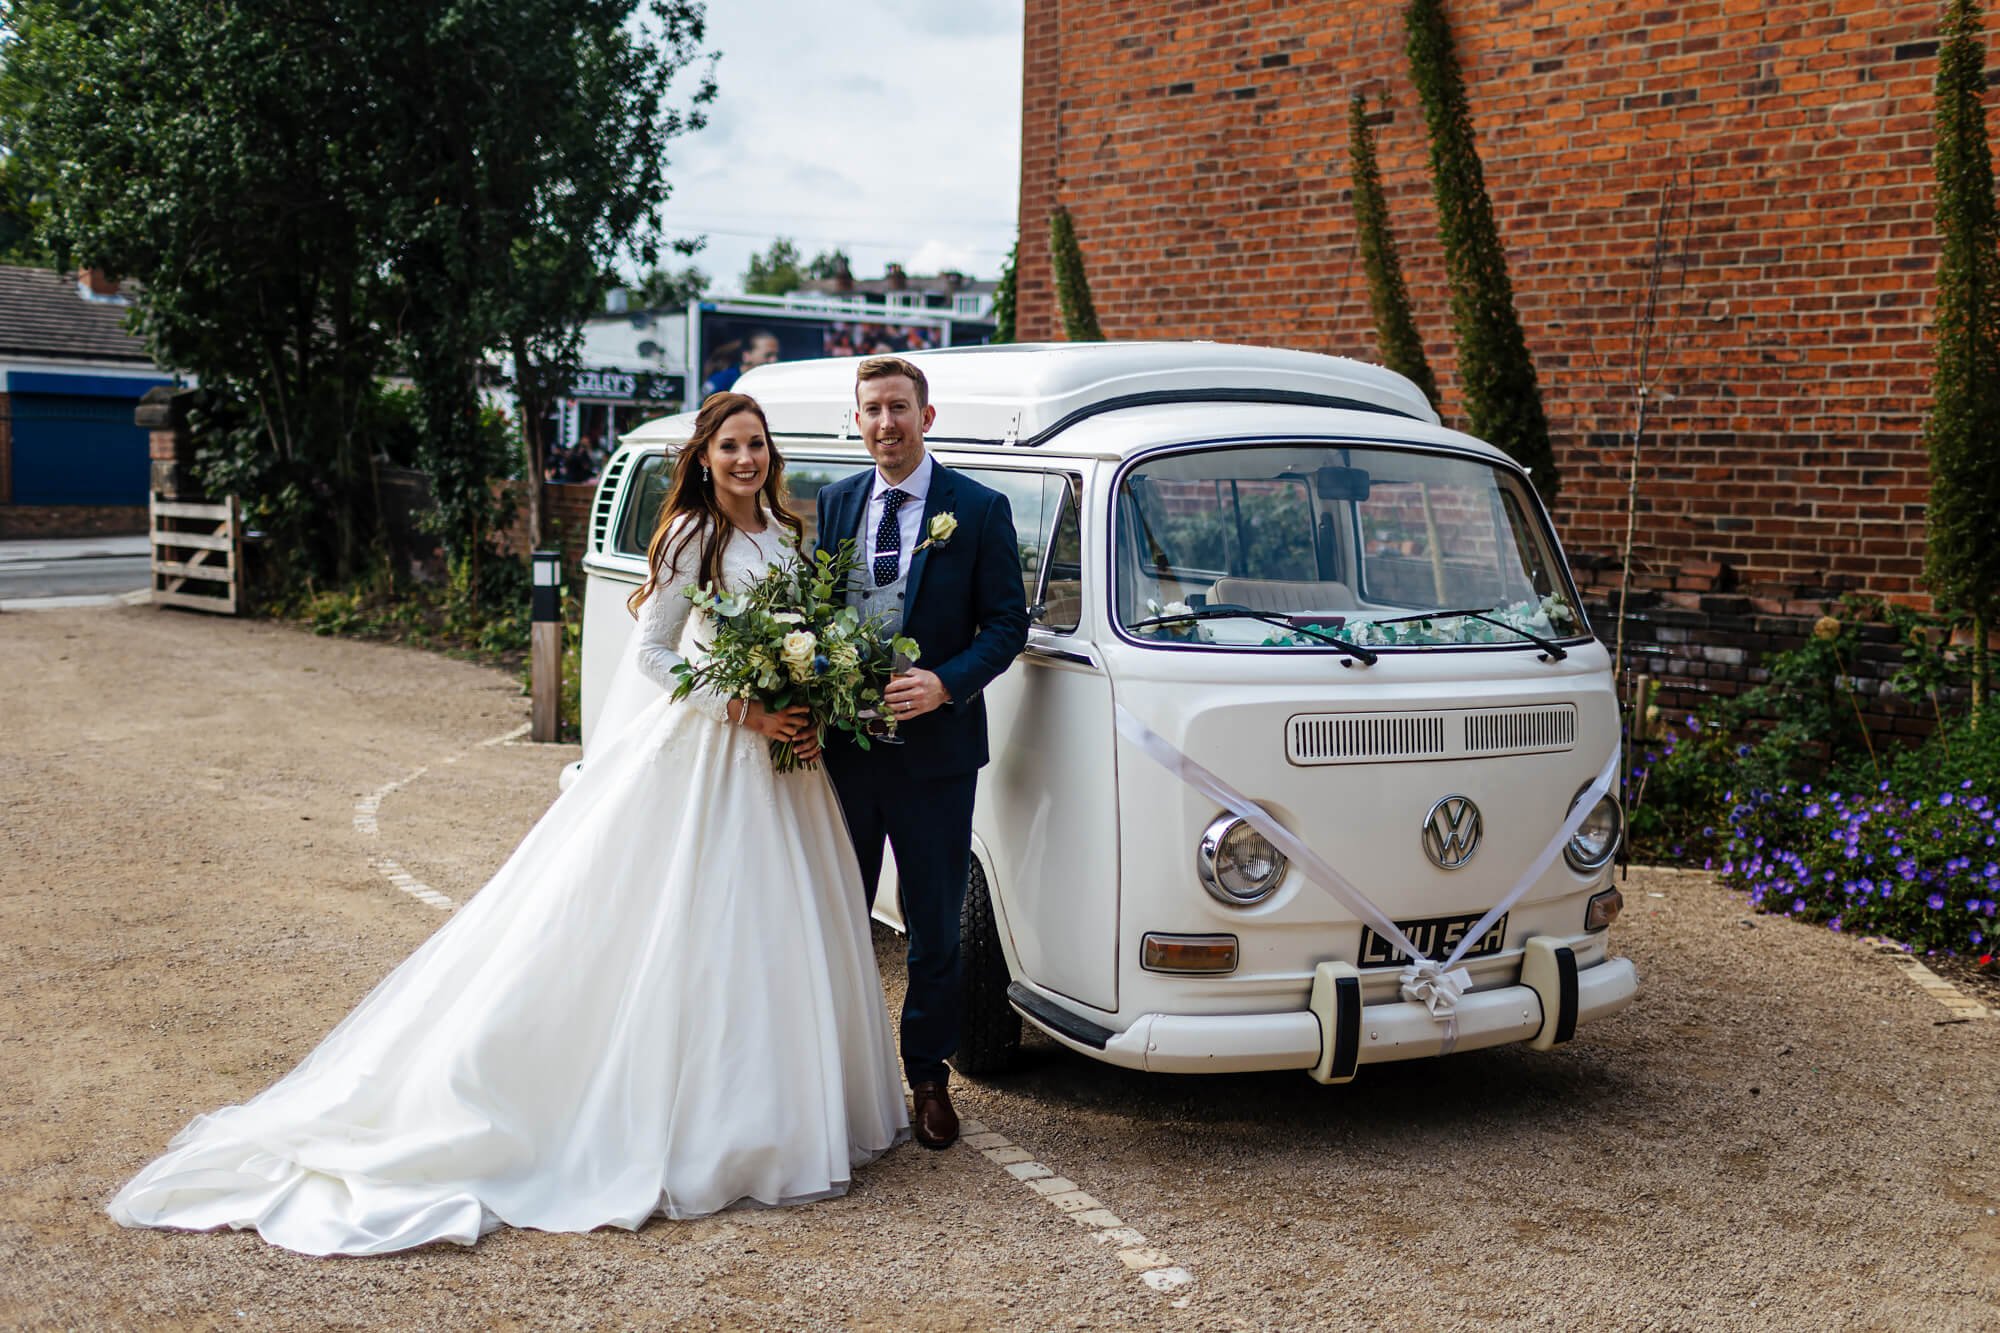 Bride and groom with their VW campervan at their wedding